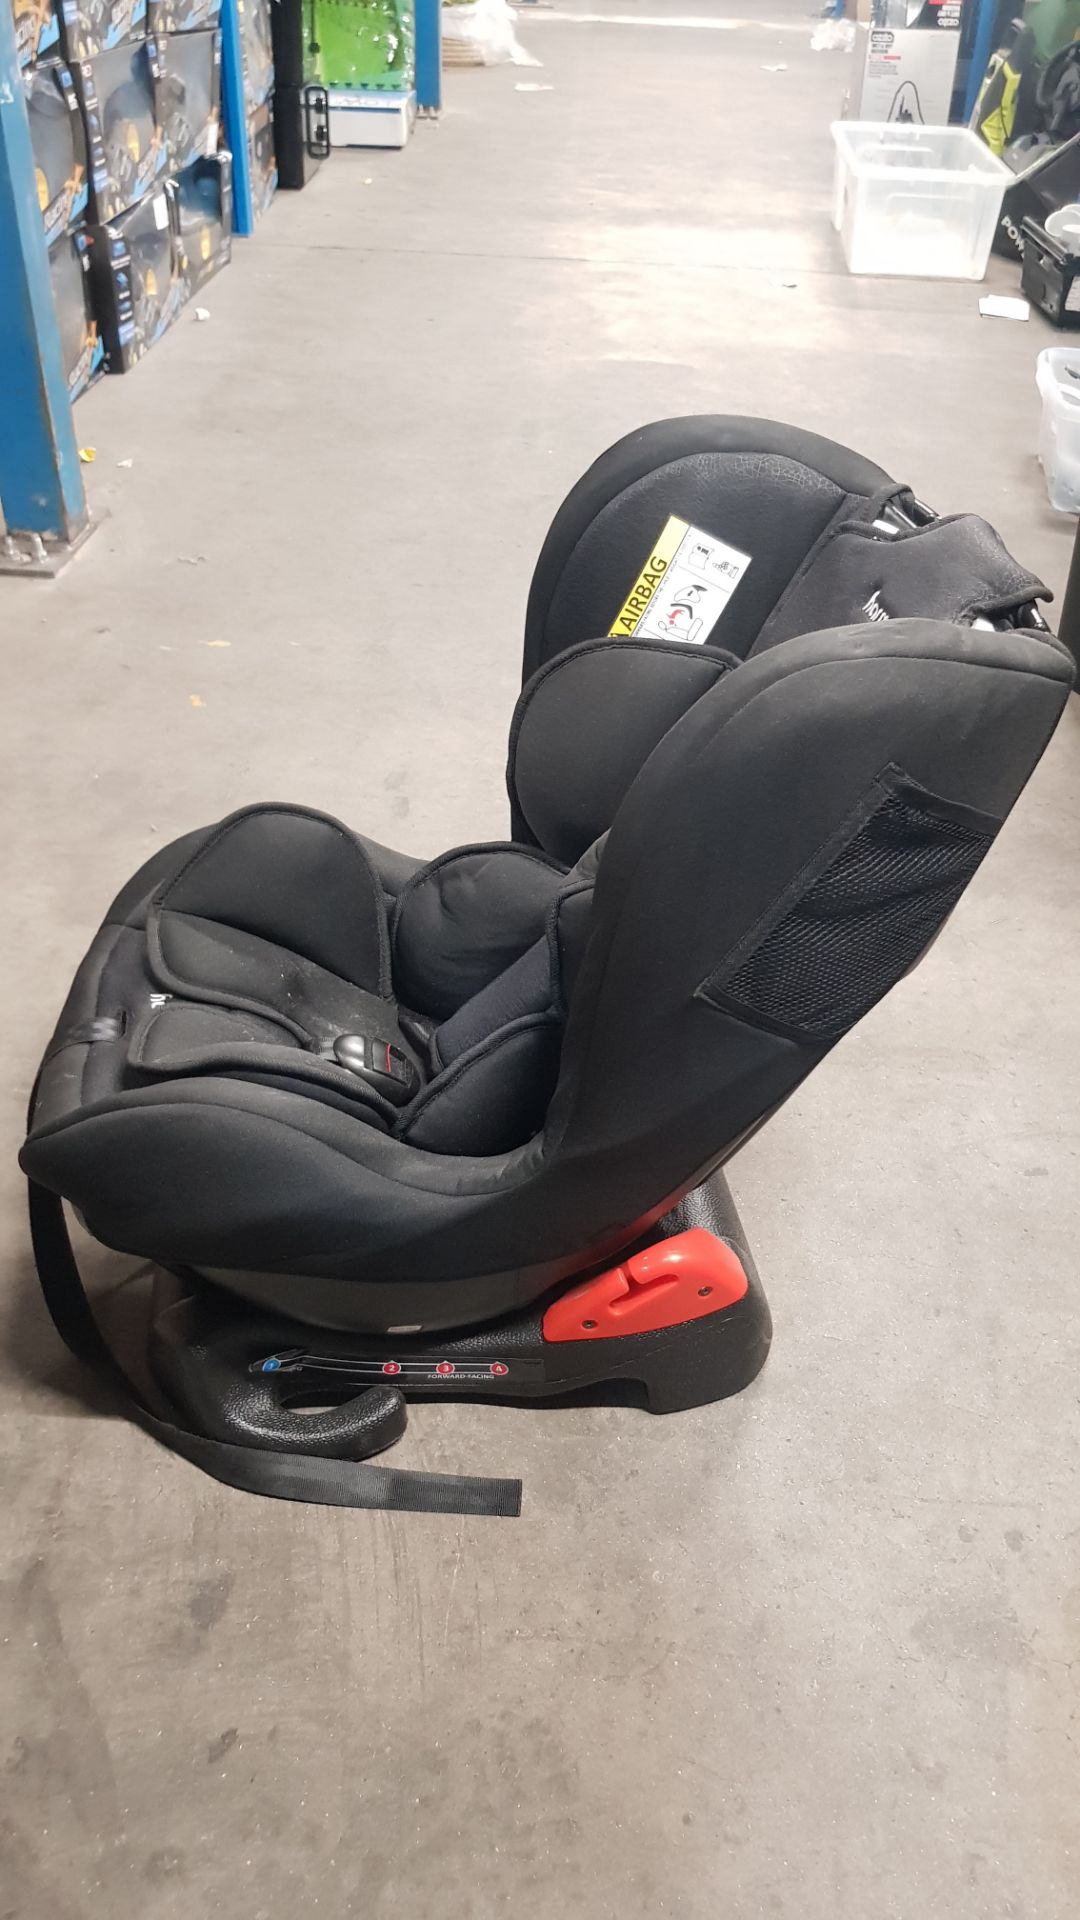 Description: (7/6J) 2x Harmony Car Seats To Include 1x Venture Deluxe Harnessed Booster Seat Forward - Image 9 of 9